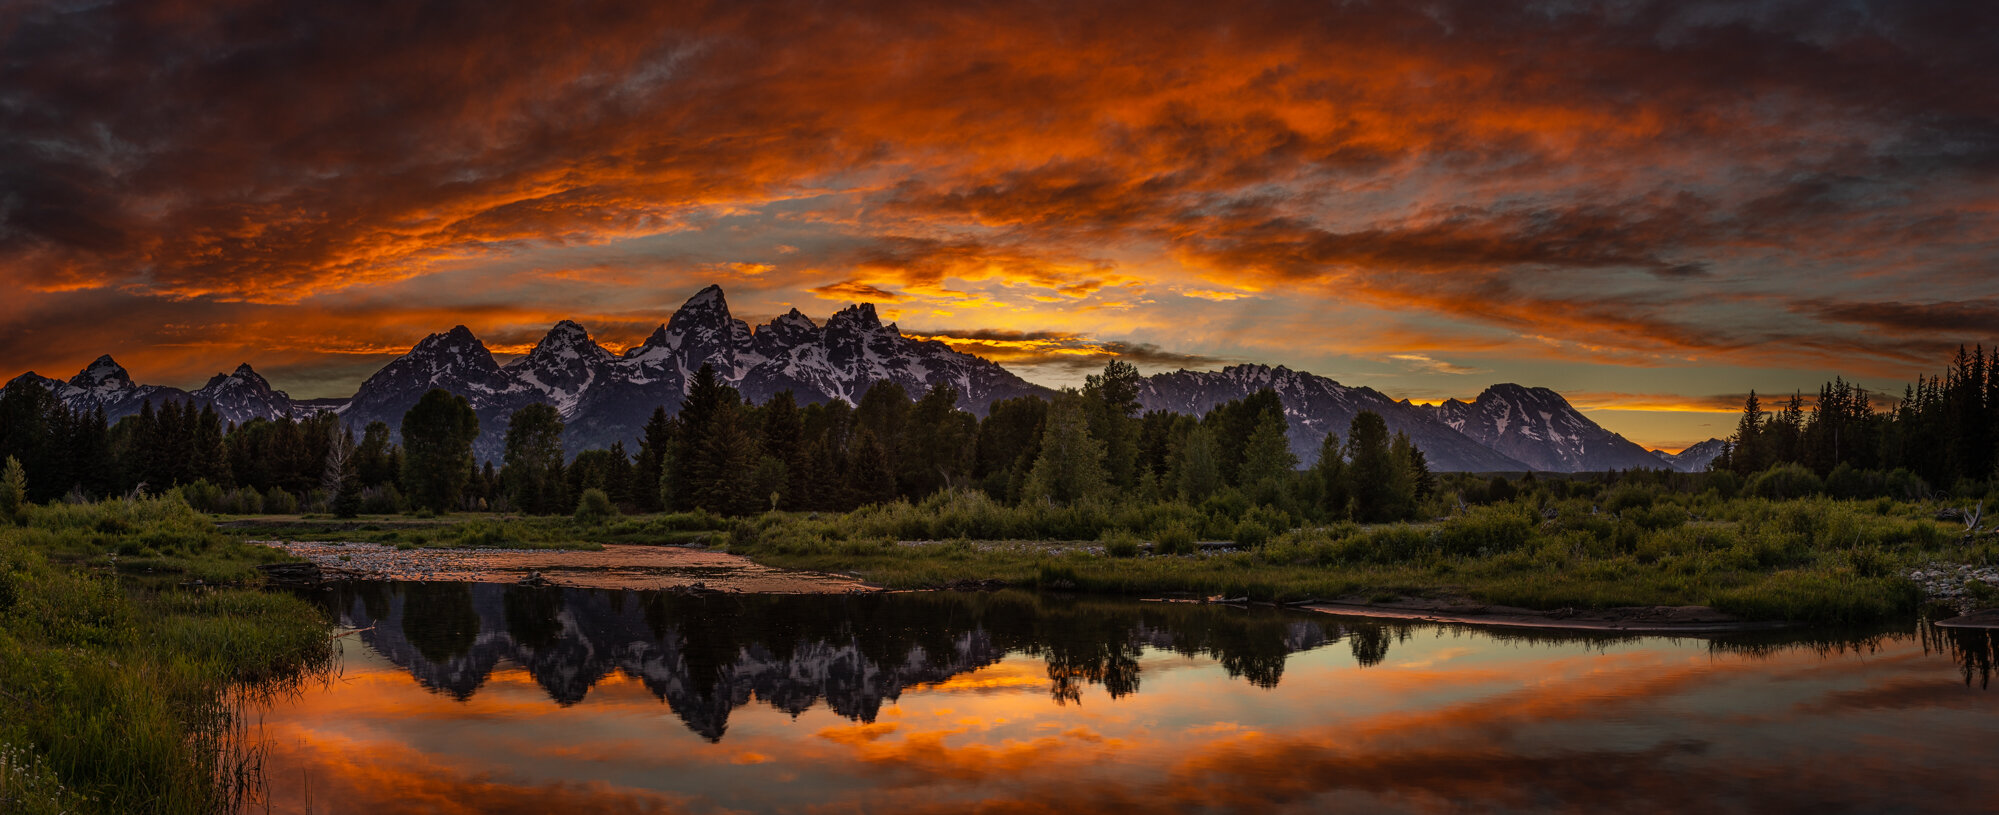 Fire in the Tetons by Les  Wentworth.jpg